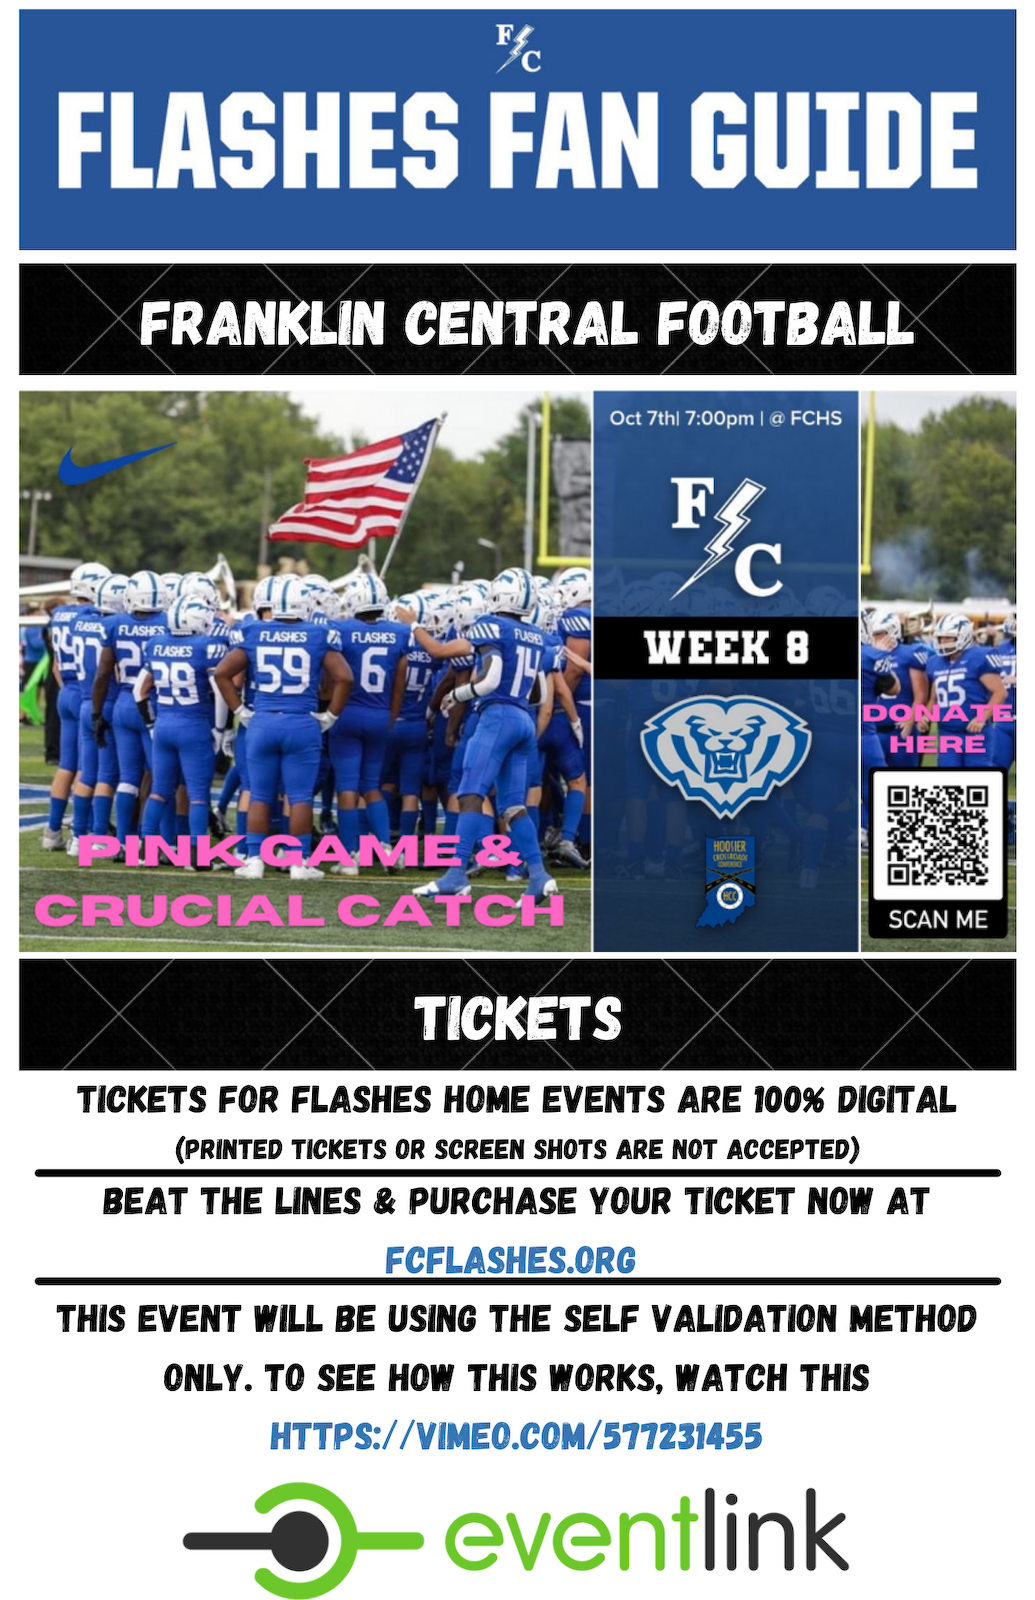 Flashes Football Week 8 vs HSE cover photo